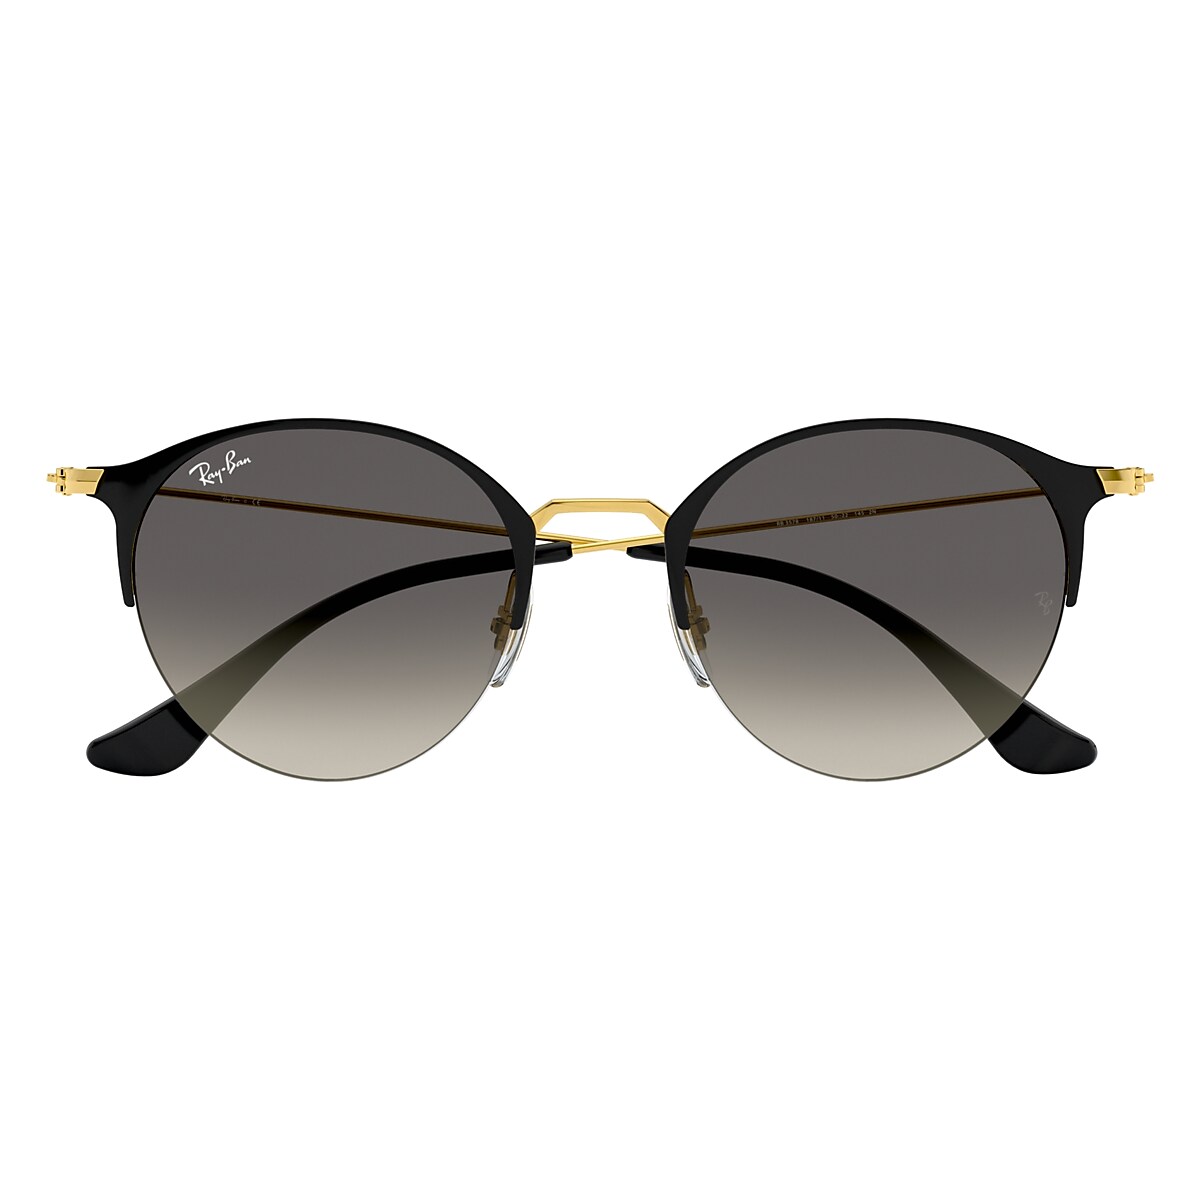 RB3578 Sunglasses in Black On Gold and Grey - RB3578 | Ray-Ban® US